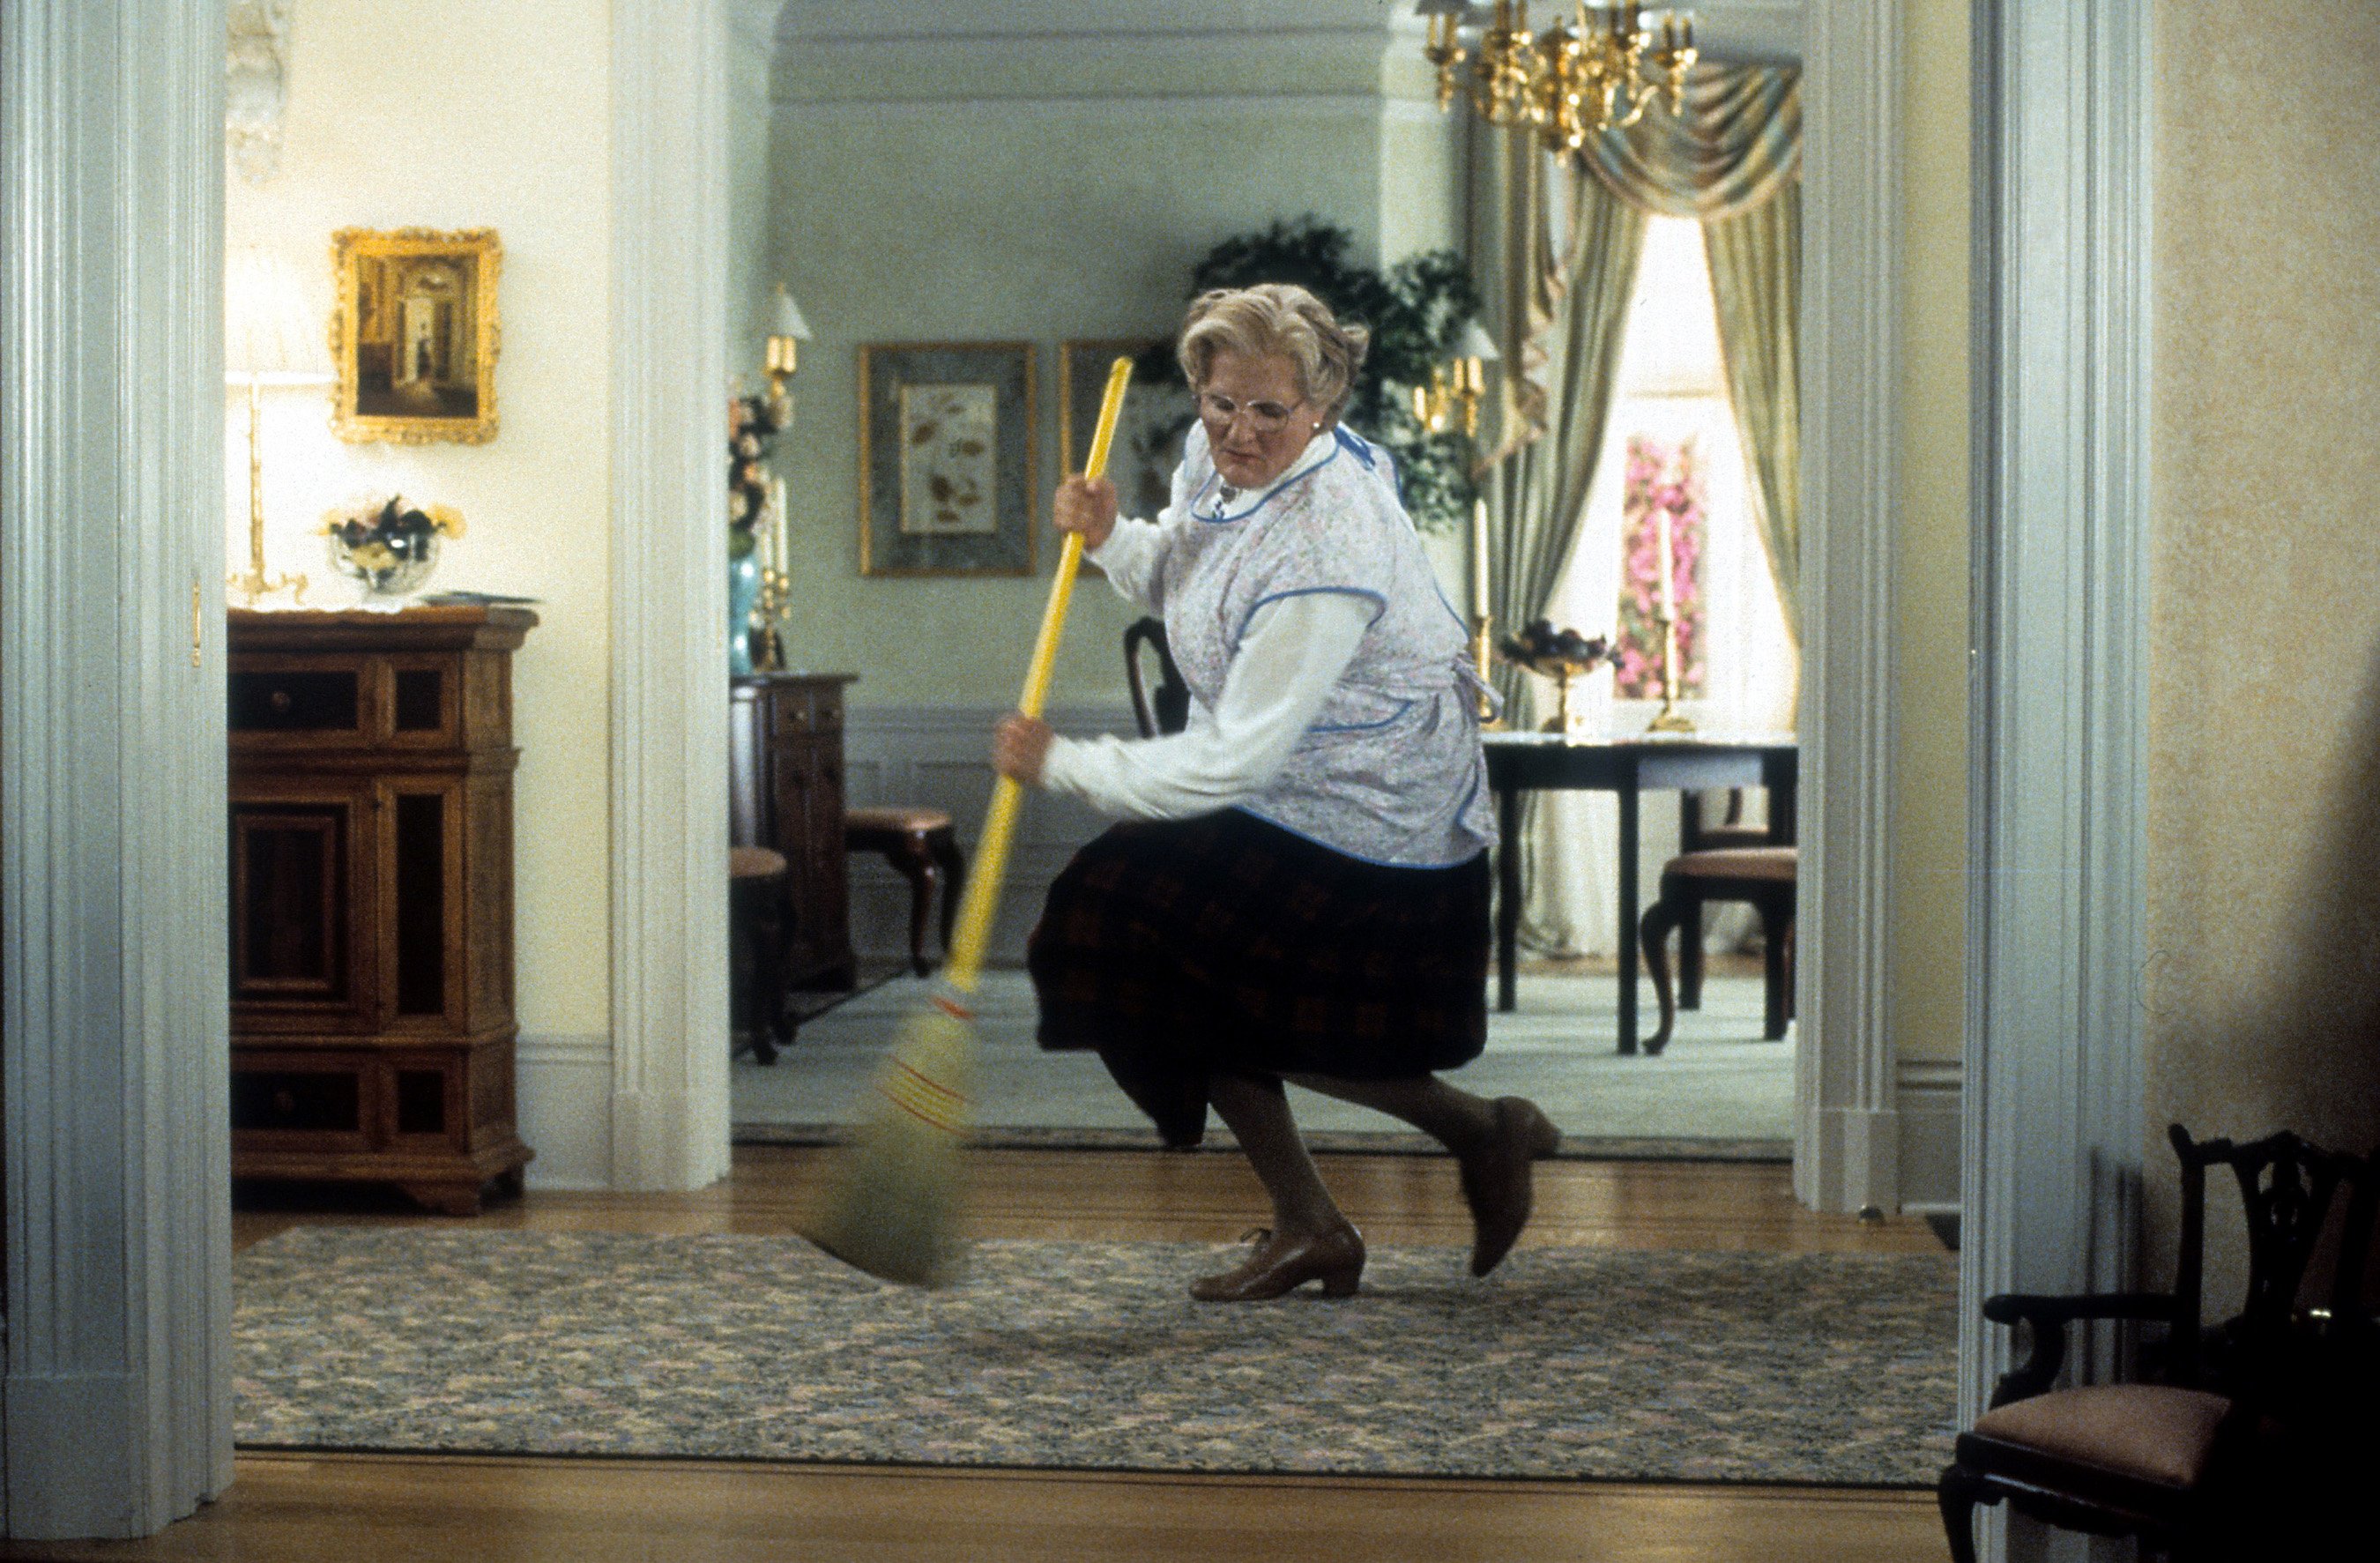 Robin Williams brooms in a scene from the film 'Mrs. Doubtfire'